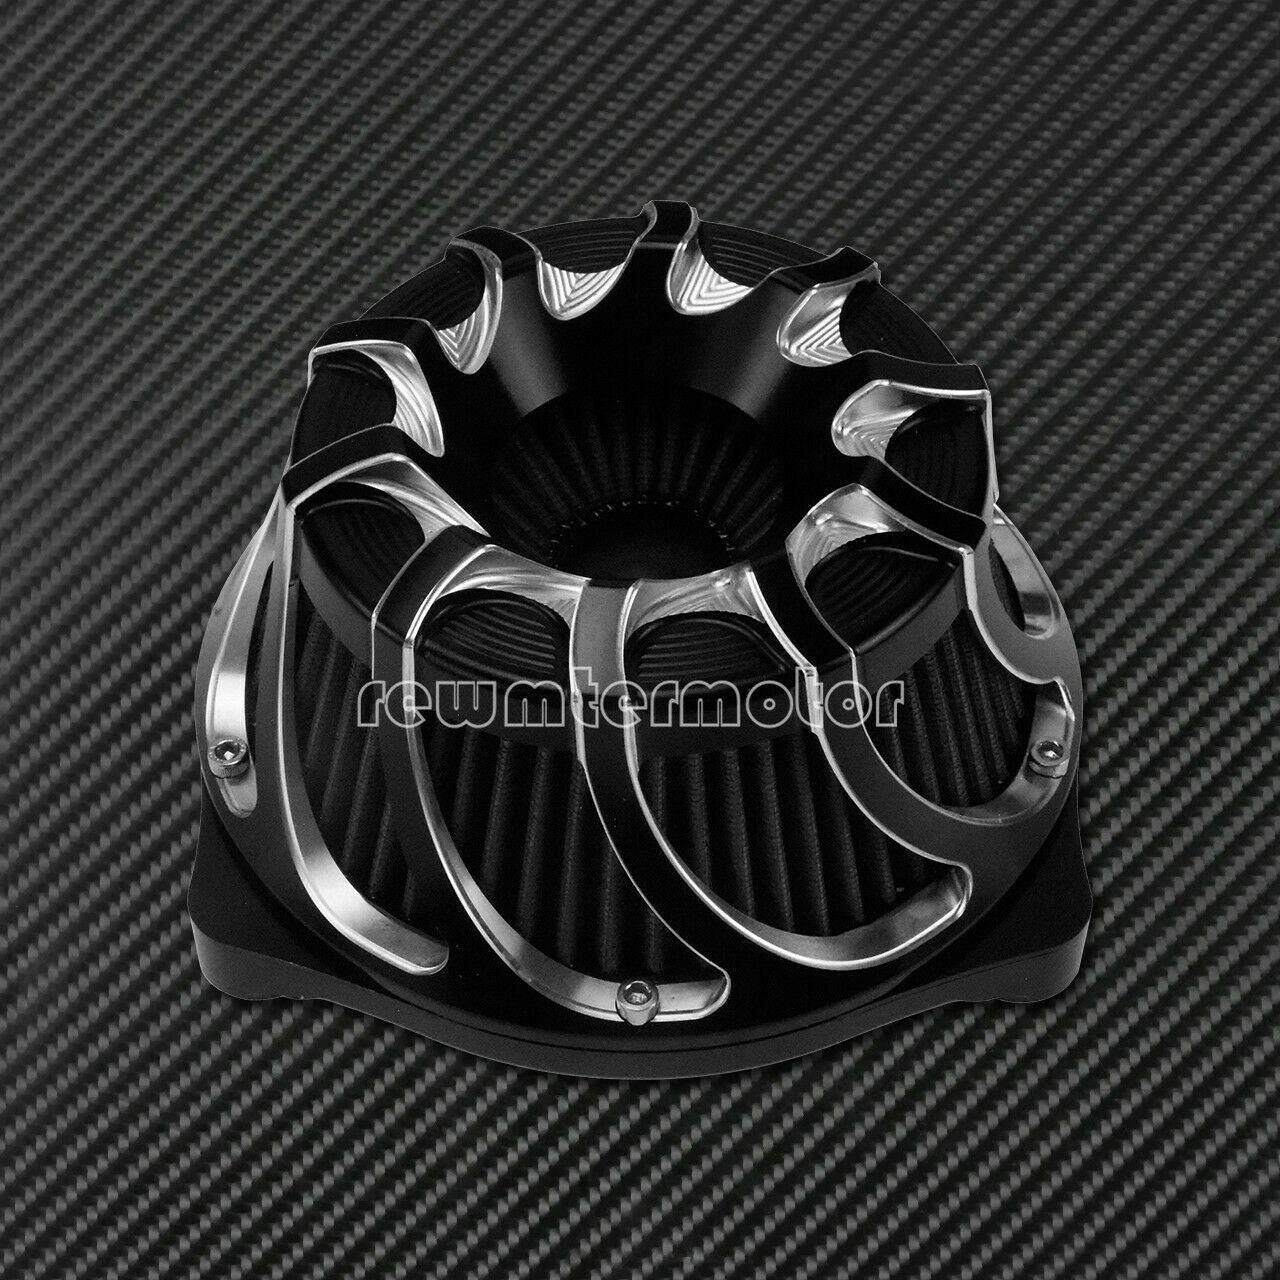 Spiral Cut Air Cleaner Intake Filter Fit For Harley M8 Touring Trike 2017-2020 - Moto Life Products